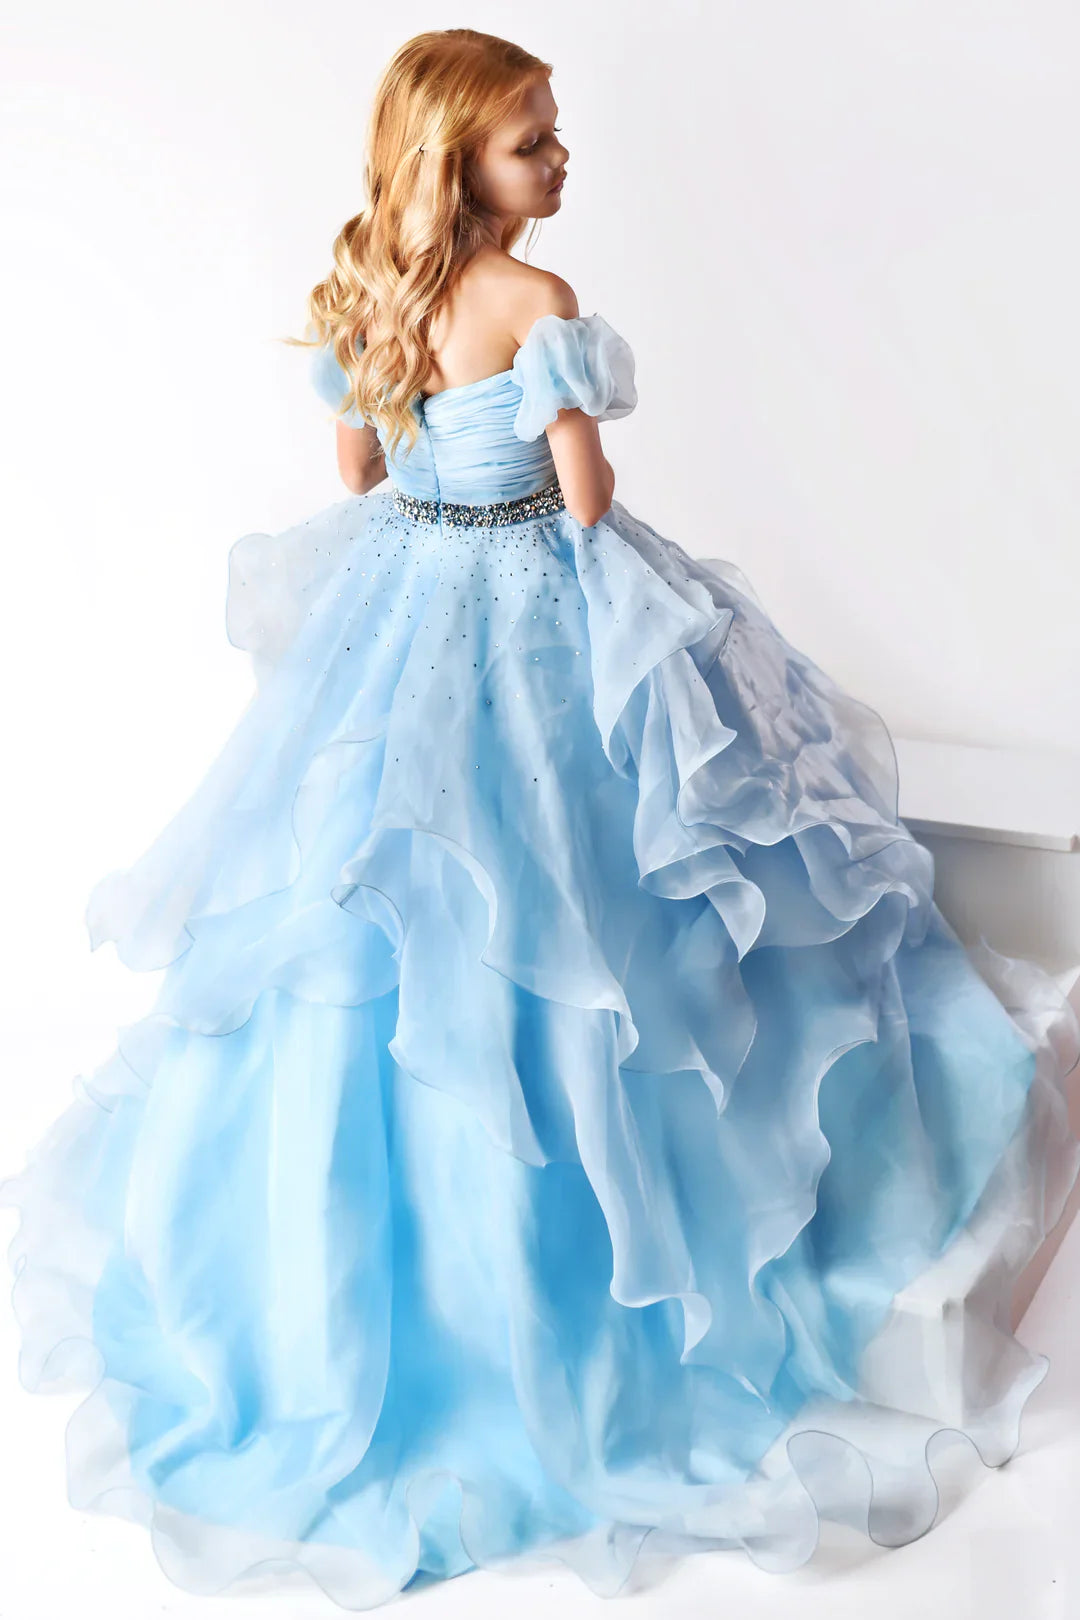 The Ava Presley 38025 Long Ruffle layer A Line Ballgown is designed for girls' pageant wear, offering classic style and sophistication. Its off-the-shoulder design features a puff sleeve, ruffle layer and detailed craftsmanship for an elegant look. Made of soft and durable fabric, it offers superior comfort and long-lasting wear.  Sizes: 2-16  Colors: Light Blue, Coral, White